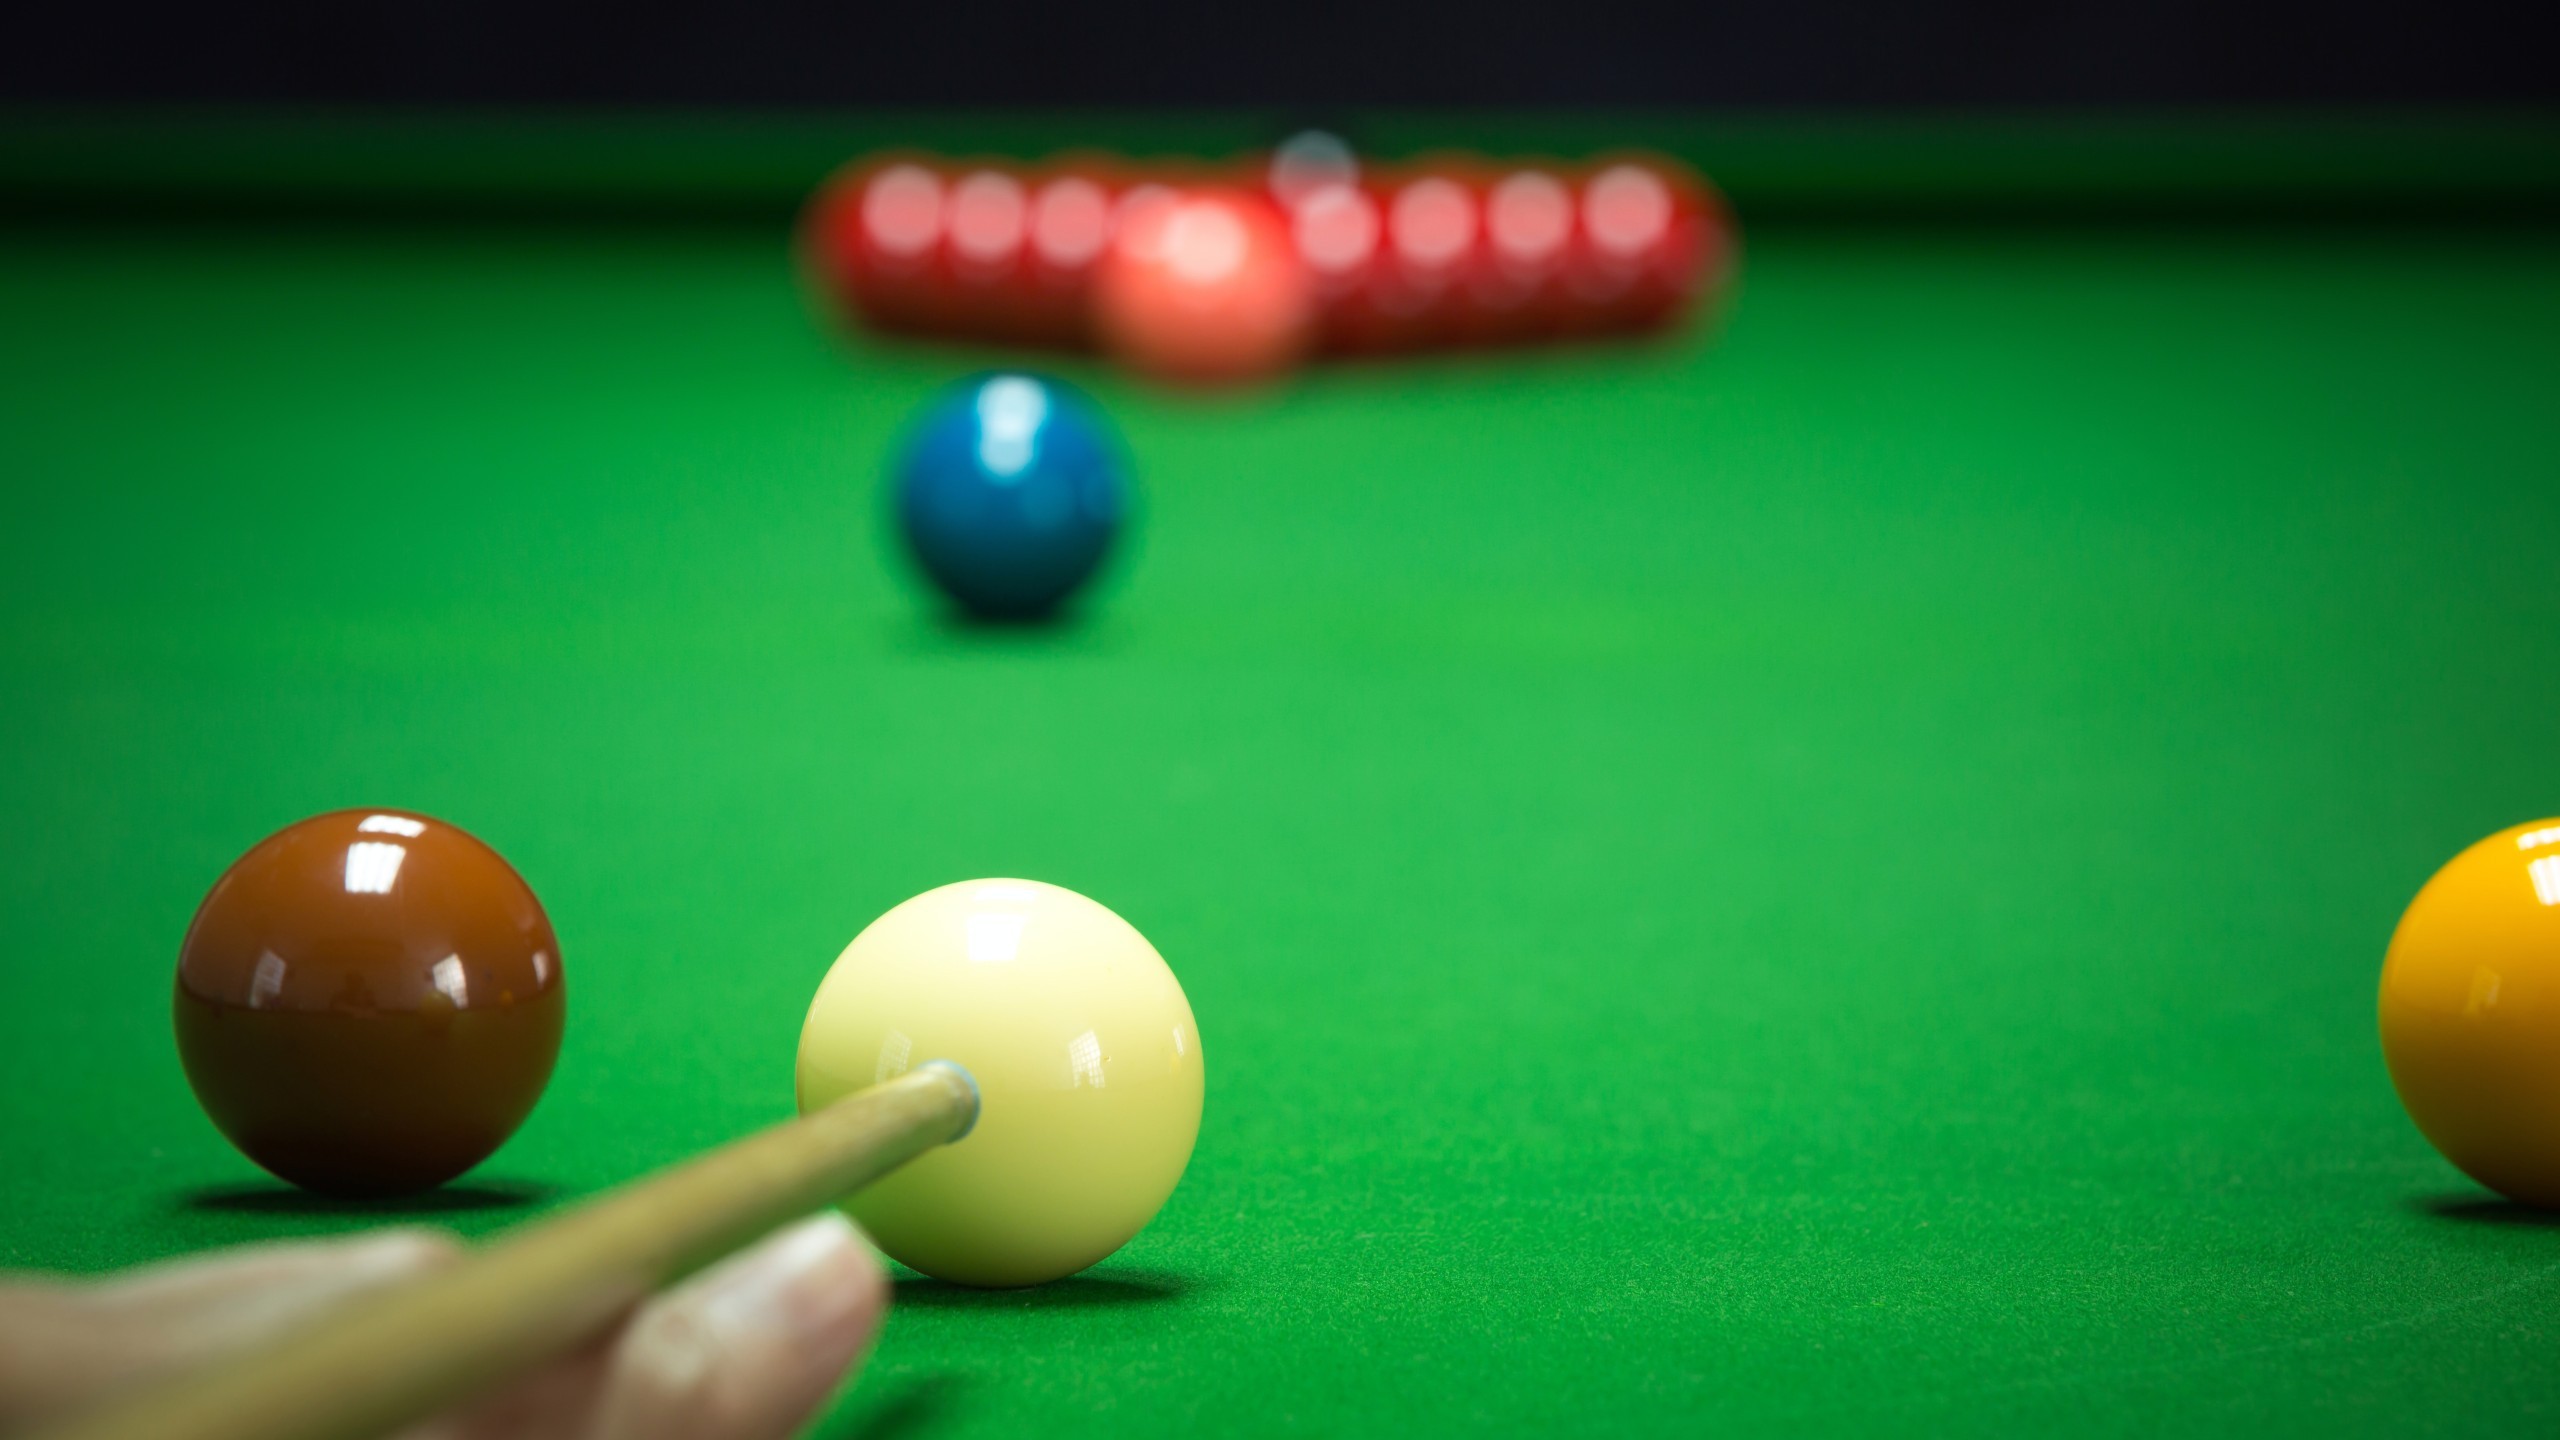 How to Watch World Mixed Doubles Snooker 2022 Live Stream Online From Anywhere